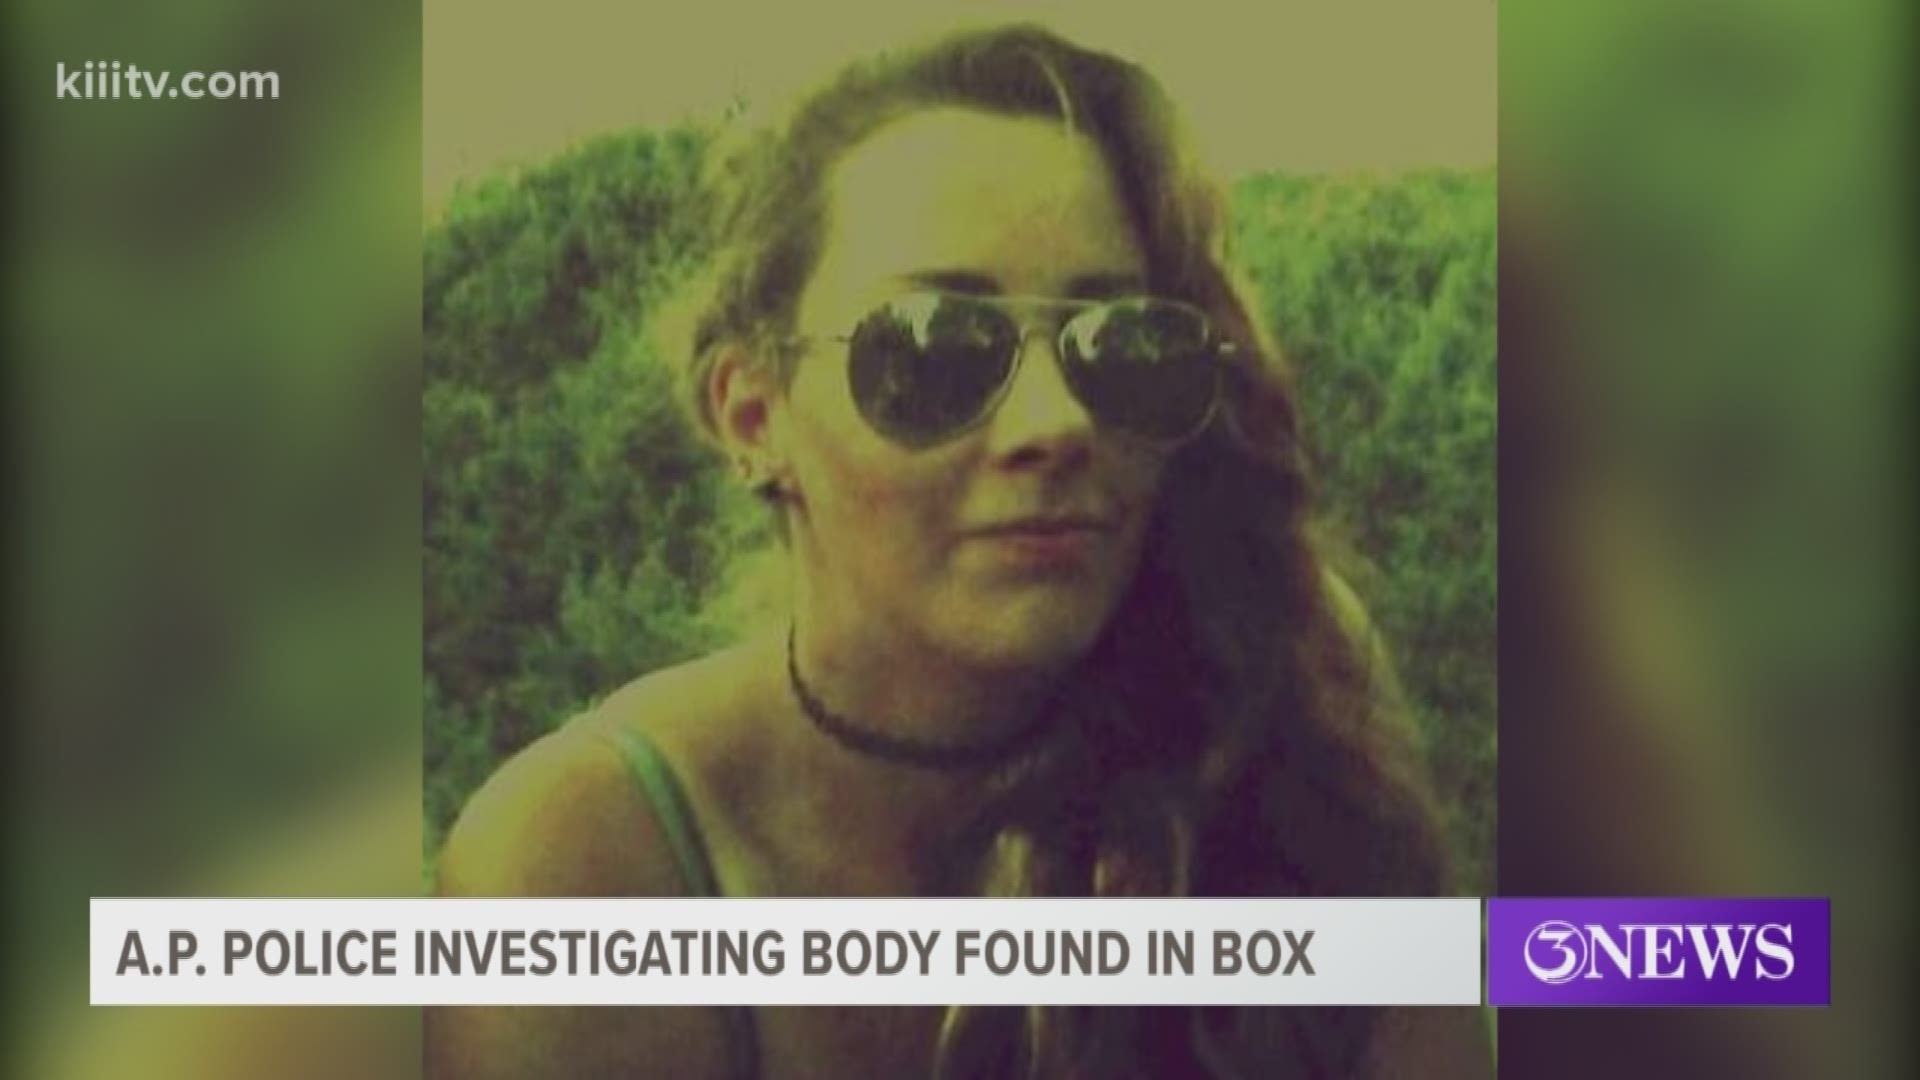 Police said family members concerned about a missing relative were able to identify the woman as 29-year-old Rebecca Anne Maloney of Rockport, Texas.